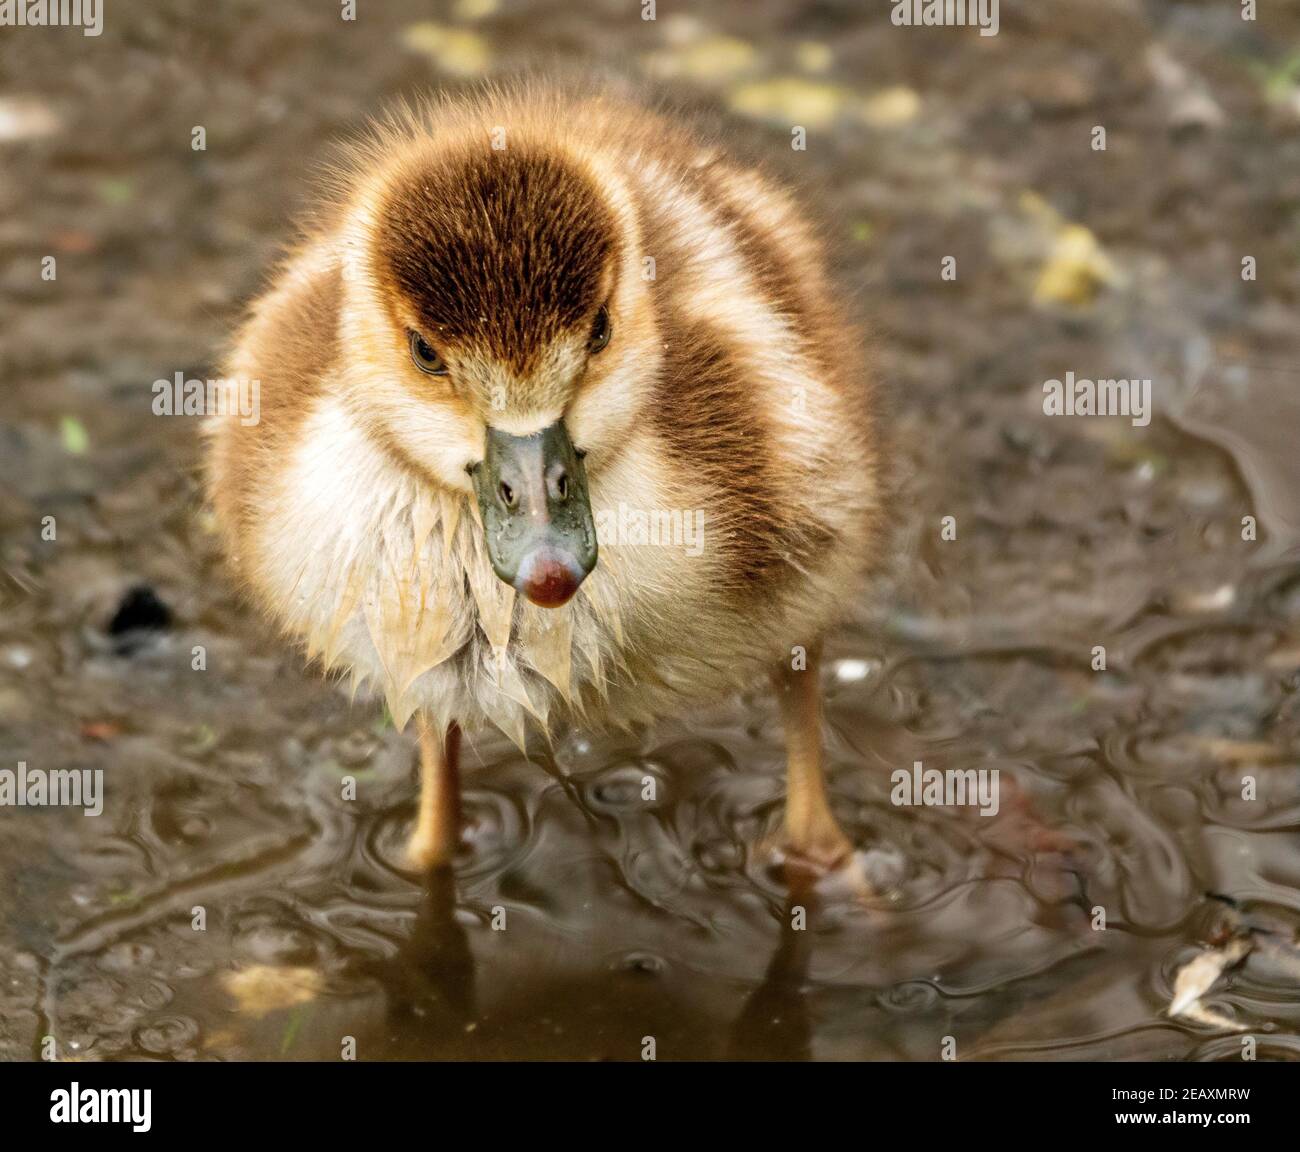 A young Egyptian Goose (Alopochen aegyptiaca) gosling standing in shallow water on Hampstead Heath, London, UK. Stock Photo